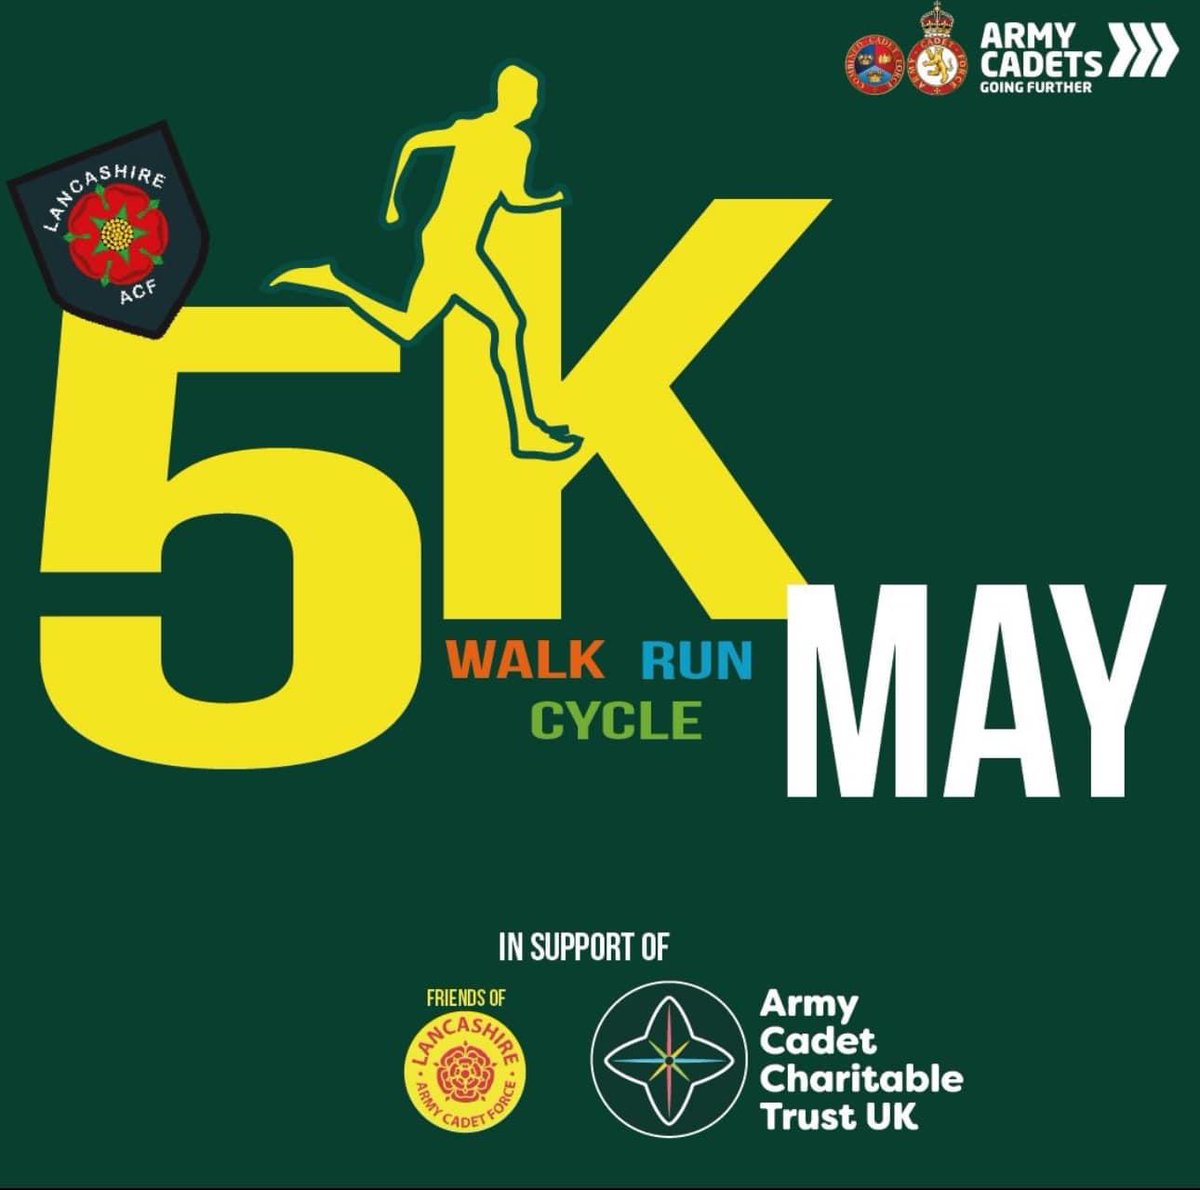 Lancashire ACF is undertaking a 5K in May challenge in aid of ACCT UK and the Friends of Lancashire ACF Charity. We are encouraging Lancs Cadets CFAV's family and friends to join us in the challenge. More details on our socials, Facebook Lancashire ACF. @AcctUk @ArmyCadetsUK